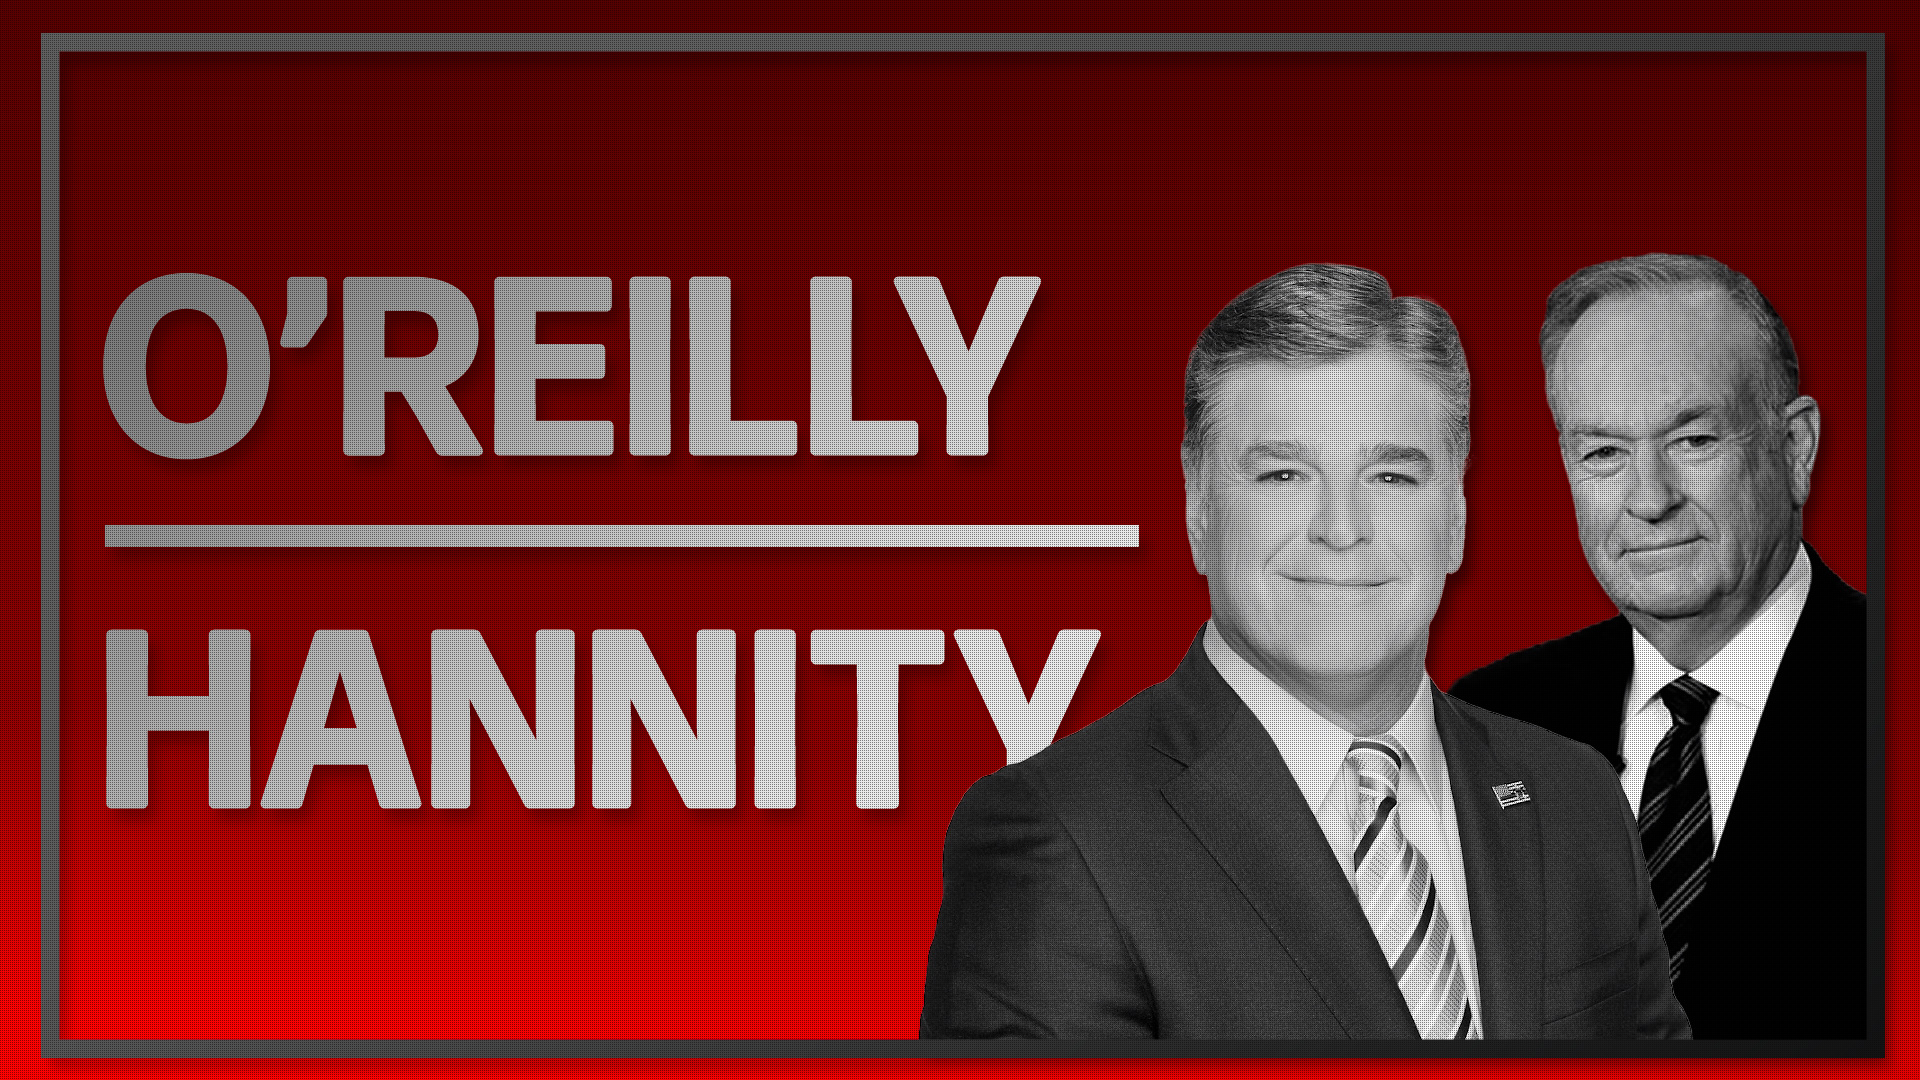 Listen: O'Reilly & Hannity on the Coming Elections